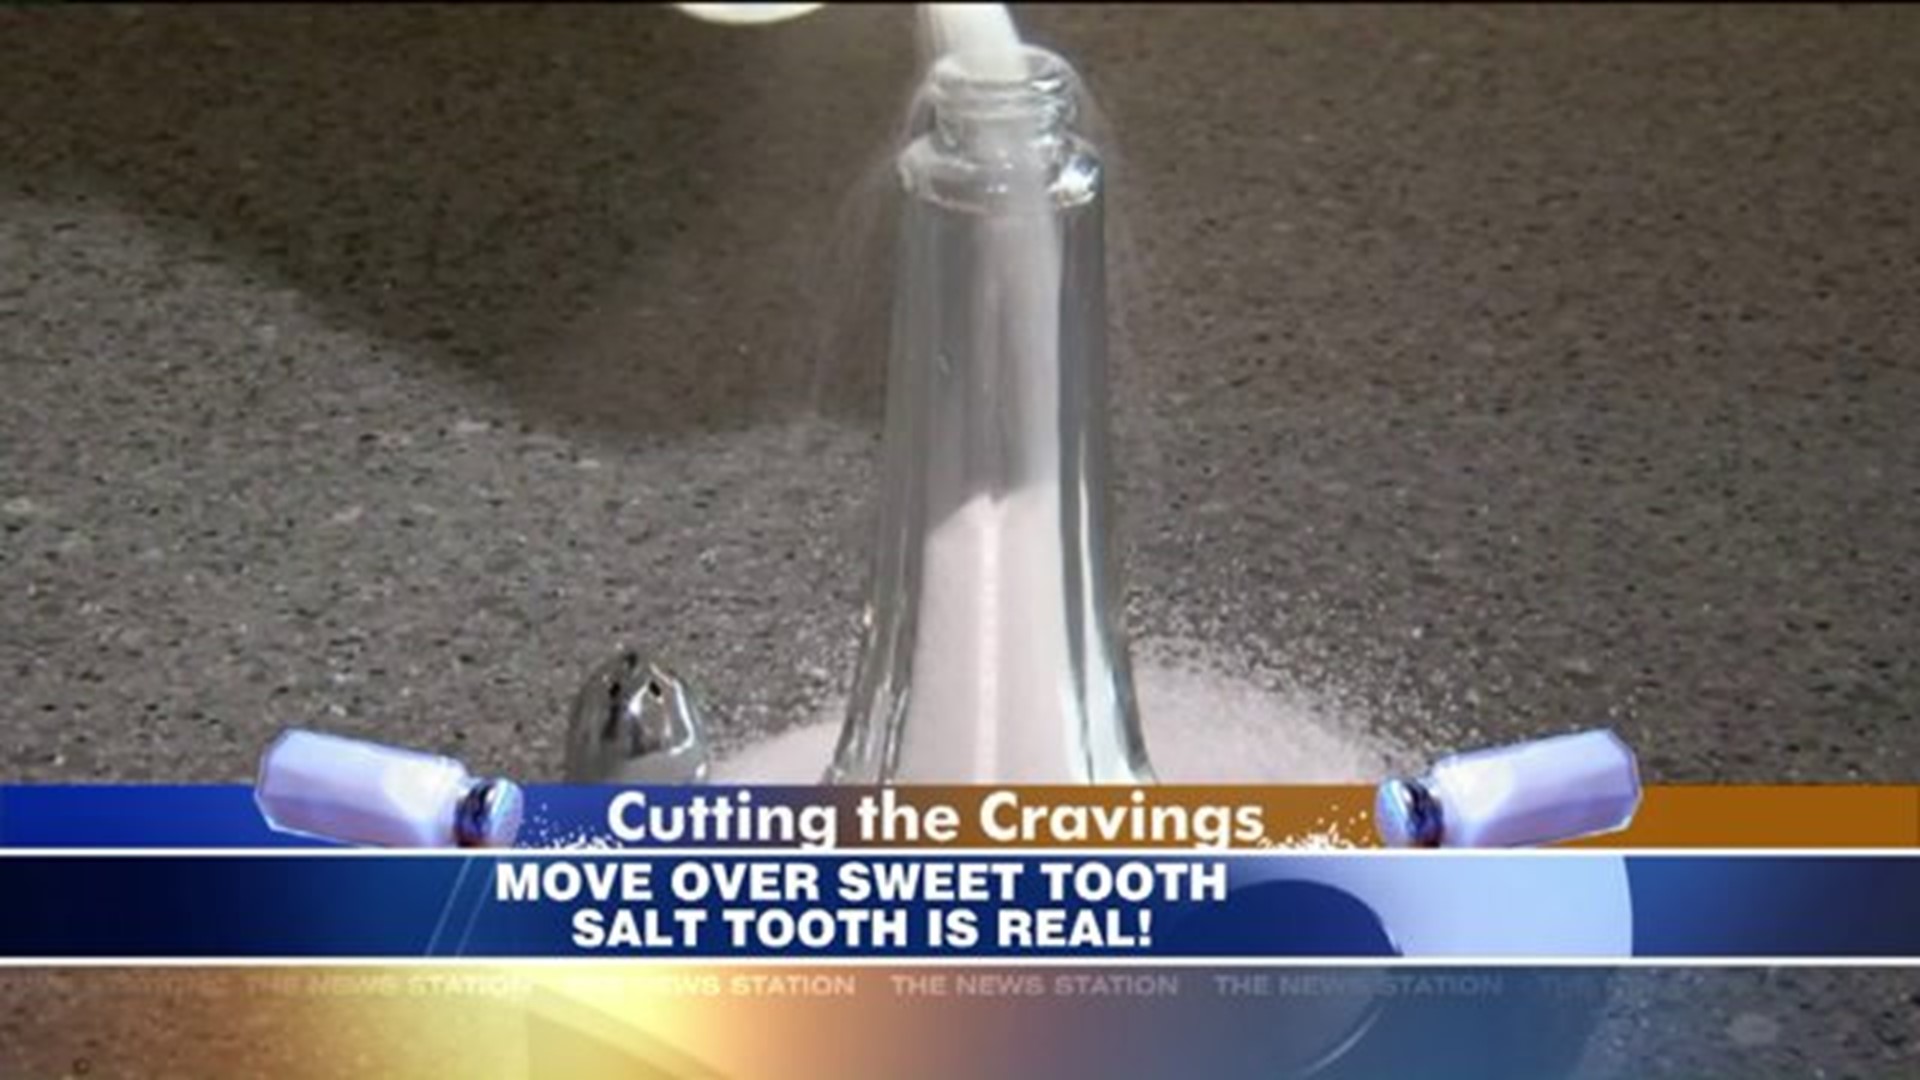 Salt Tooth is Real!